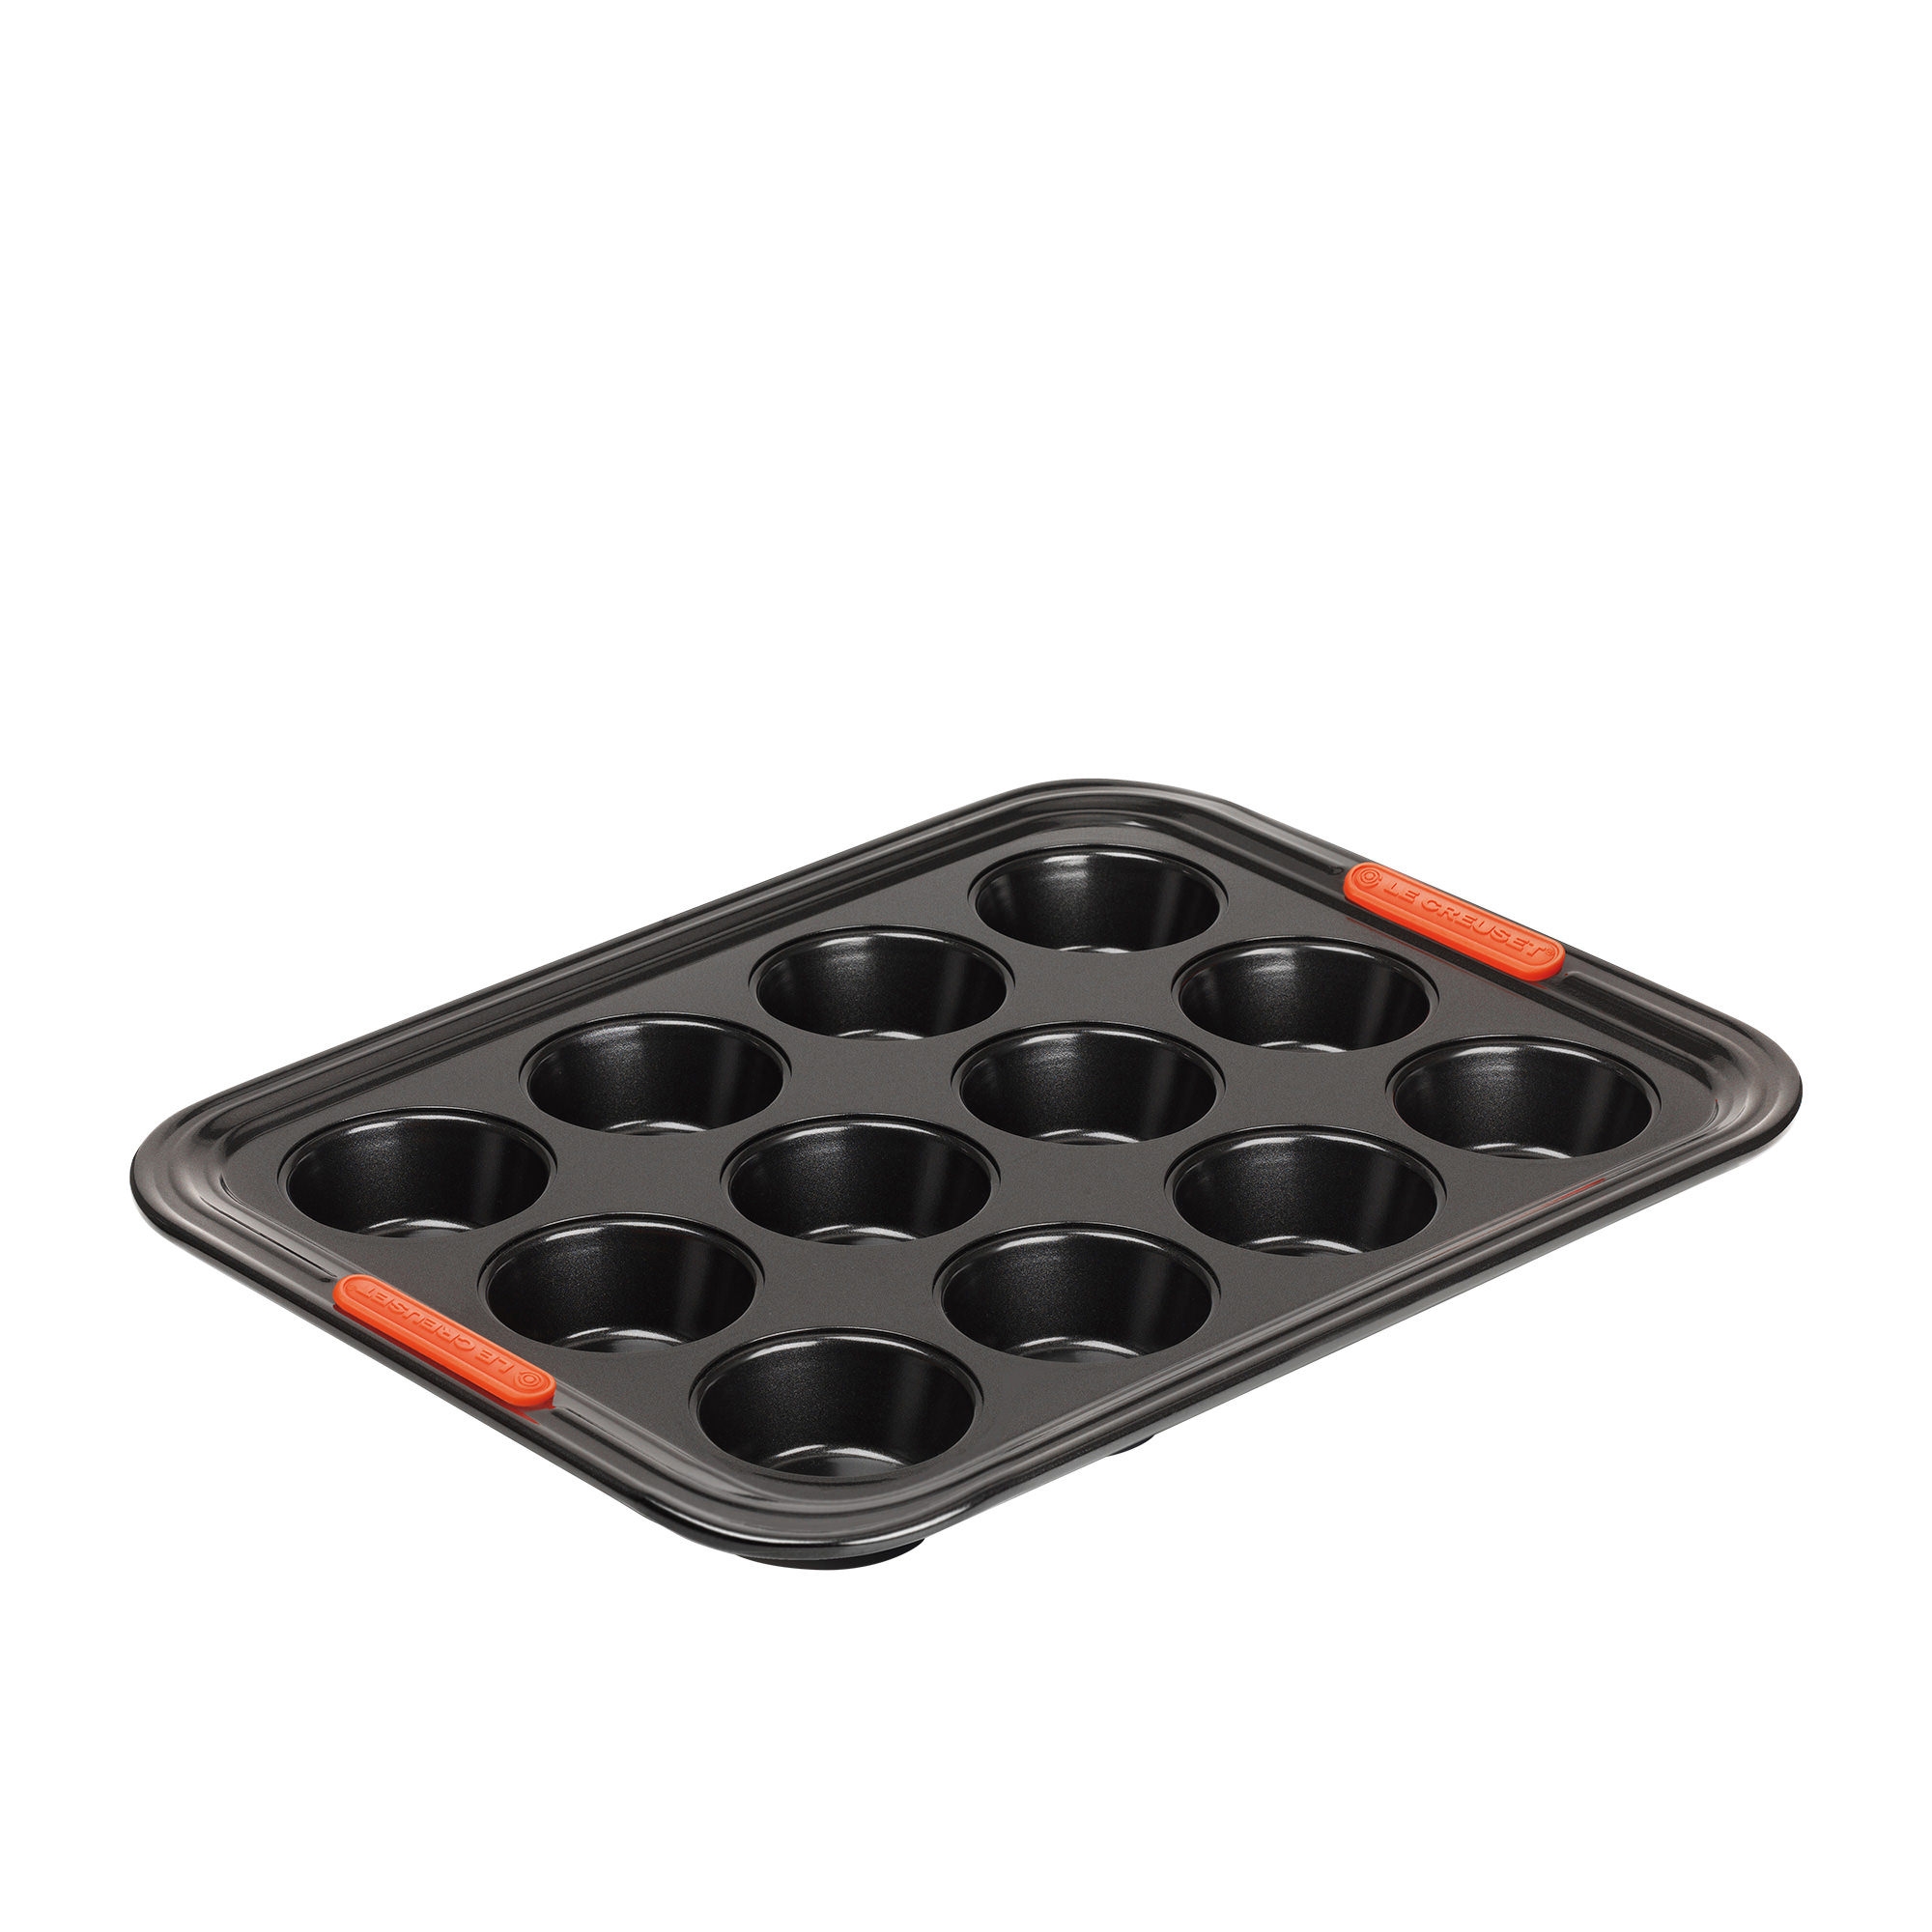 Le Creuset Toughened Non Stick Muffin Tray 12 Cup Image 1